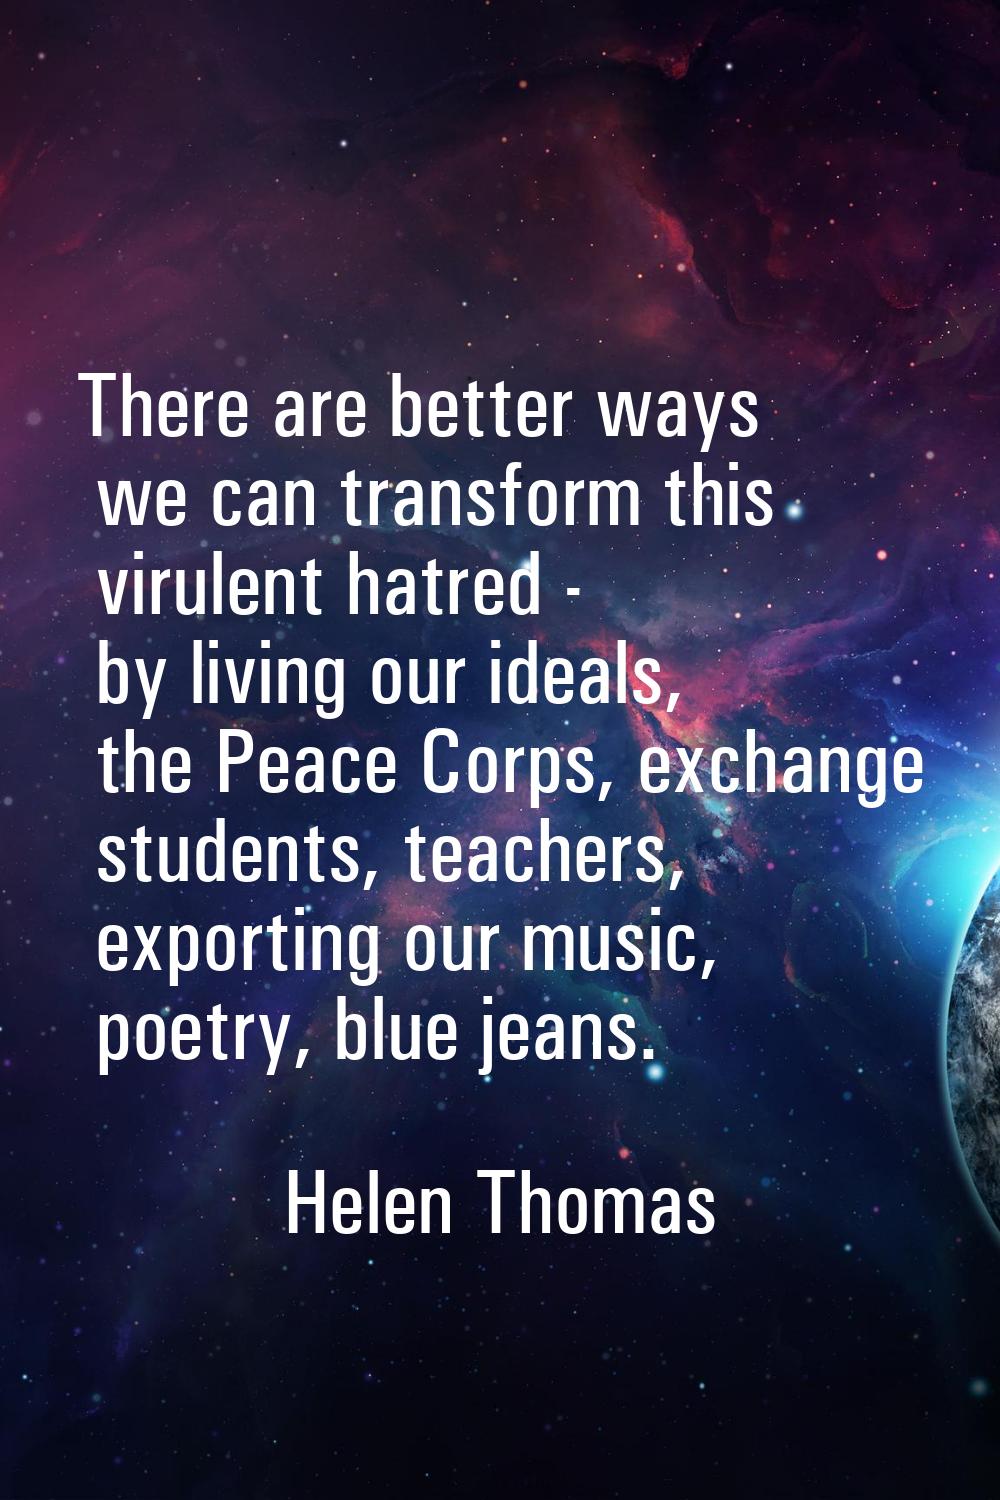 There are better ways we can transform this virulent hatred - by living our ideals, the Peace Corps